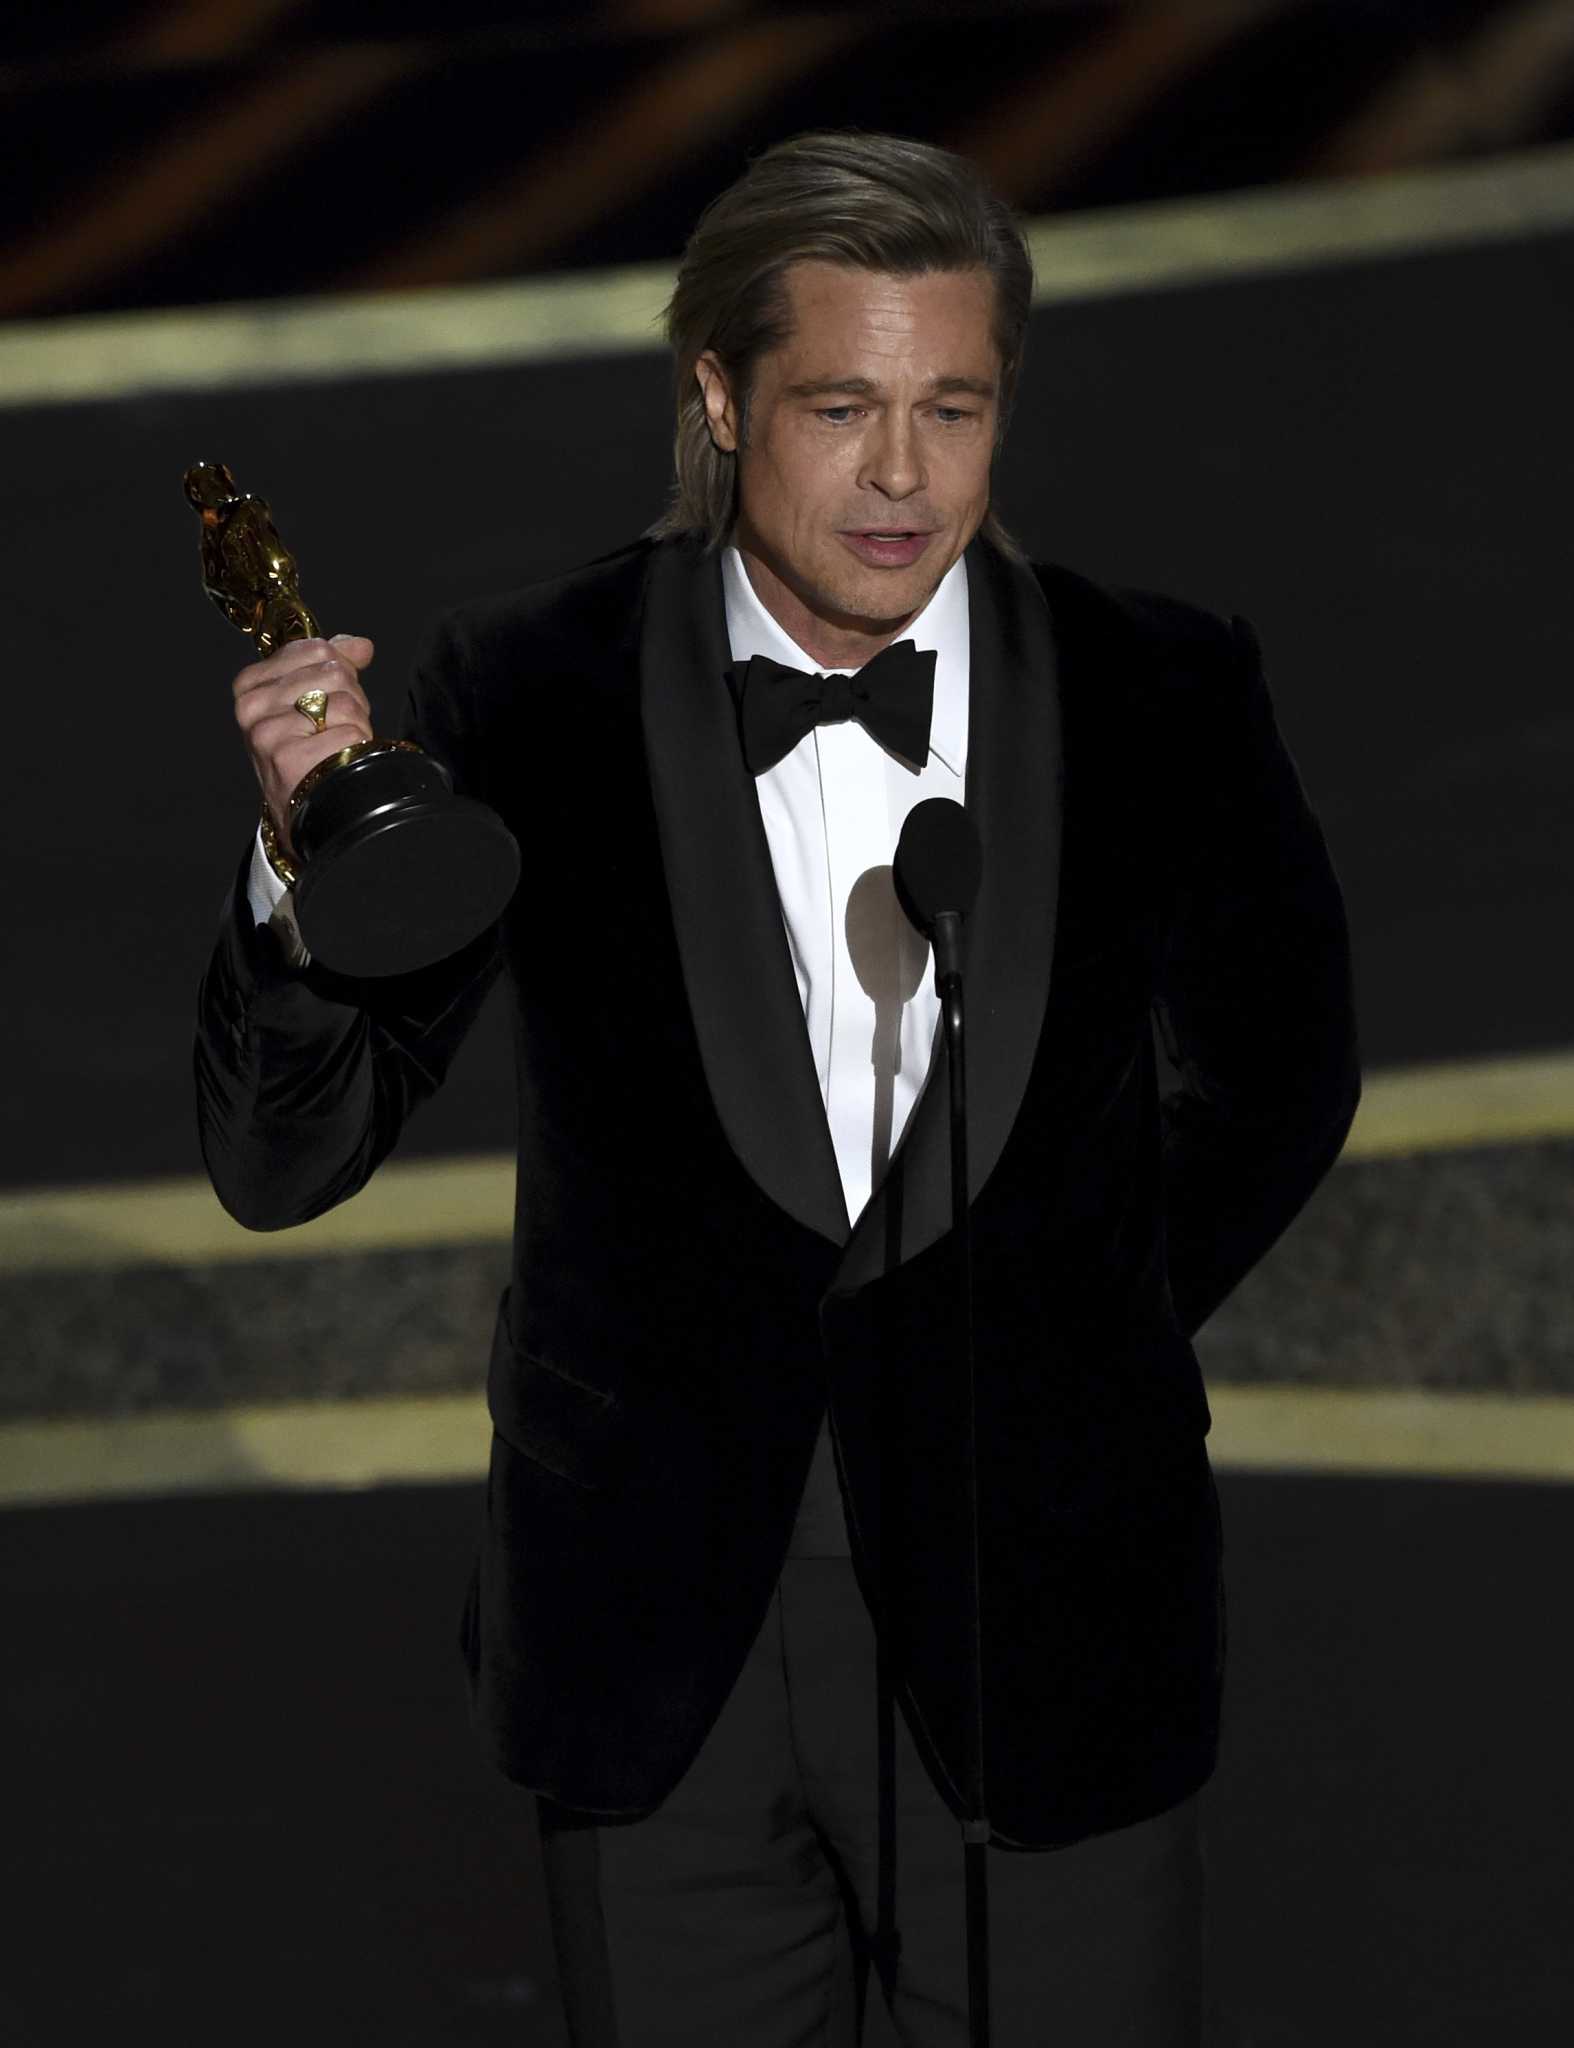 Oscars 2020 winners: Full list of results with live updates - SFGate